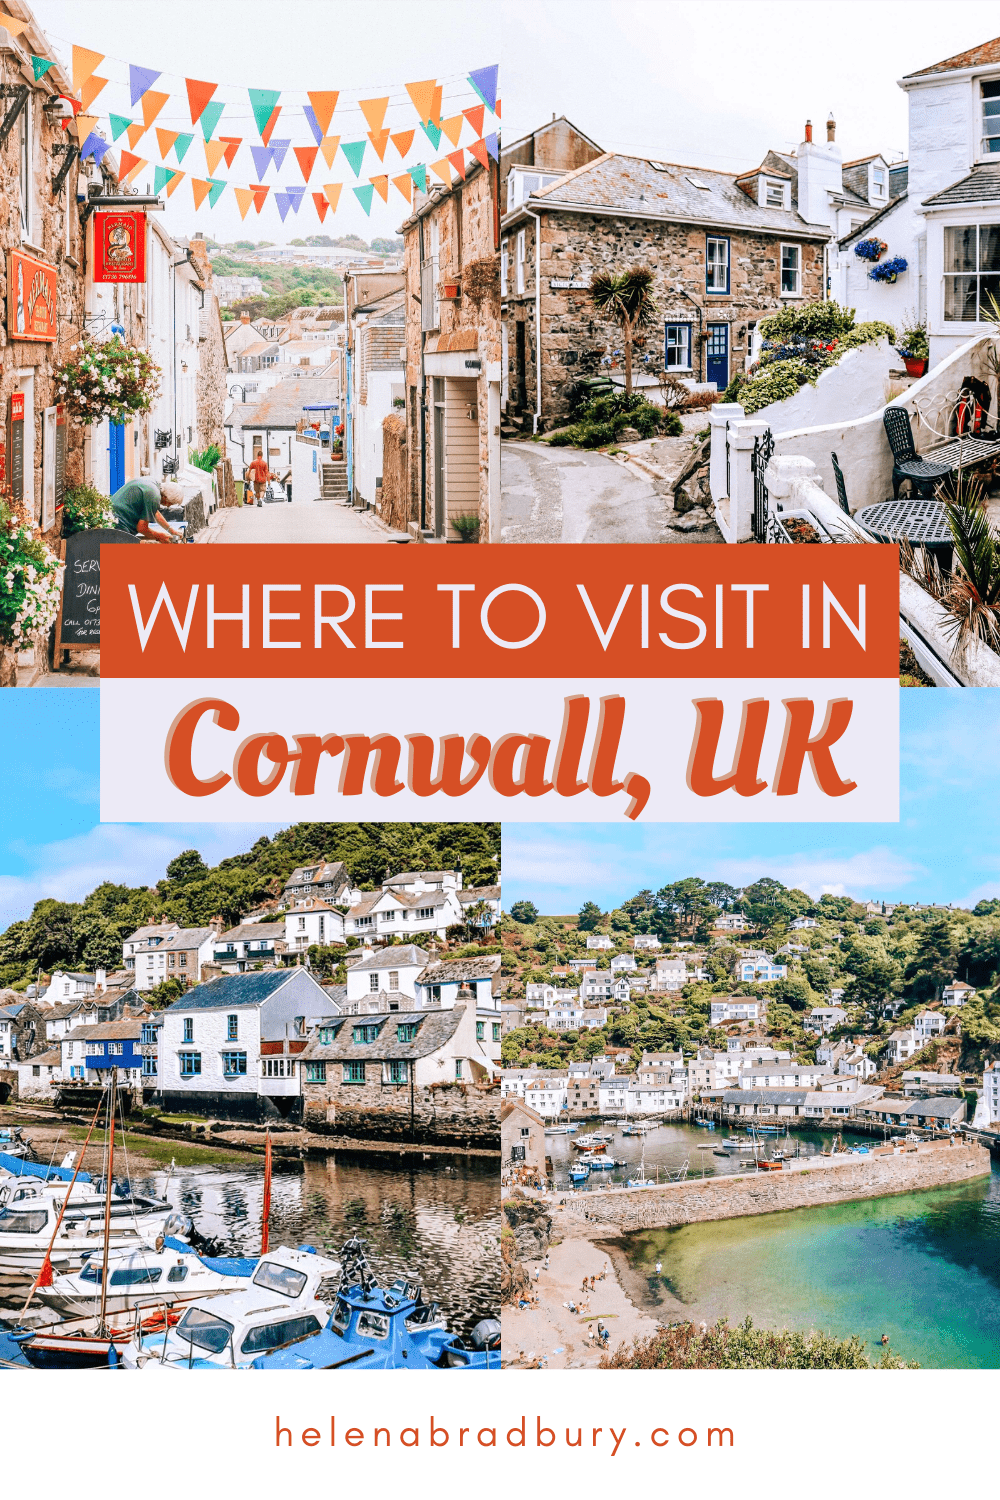 Best places to visit in Cornwall UK